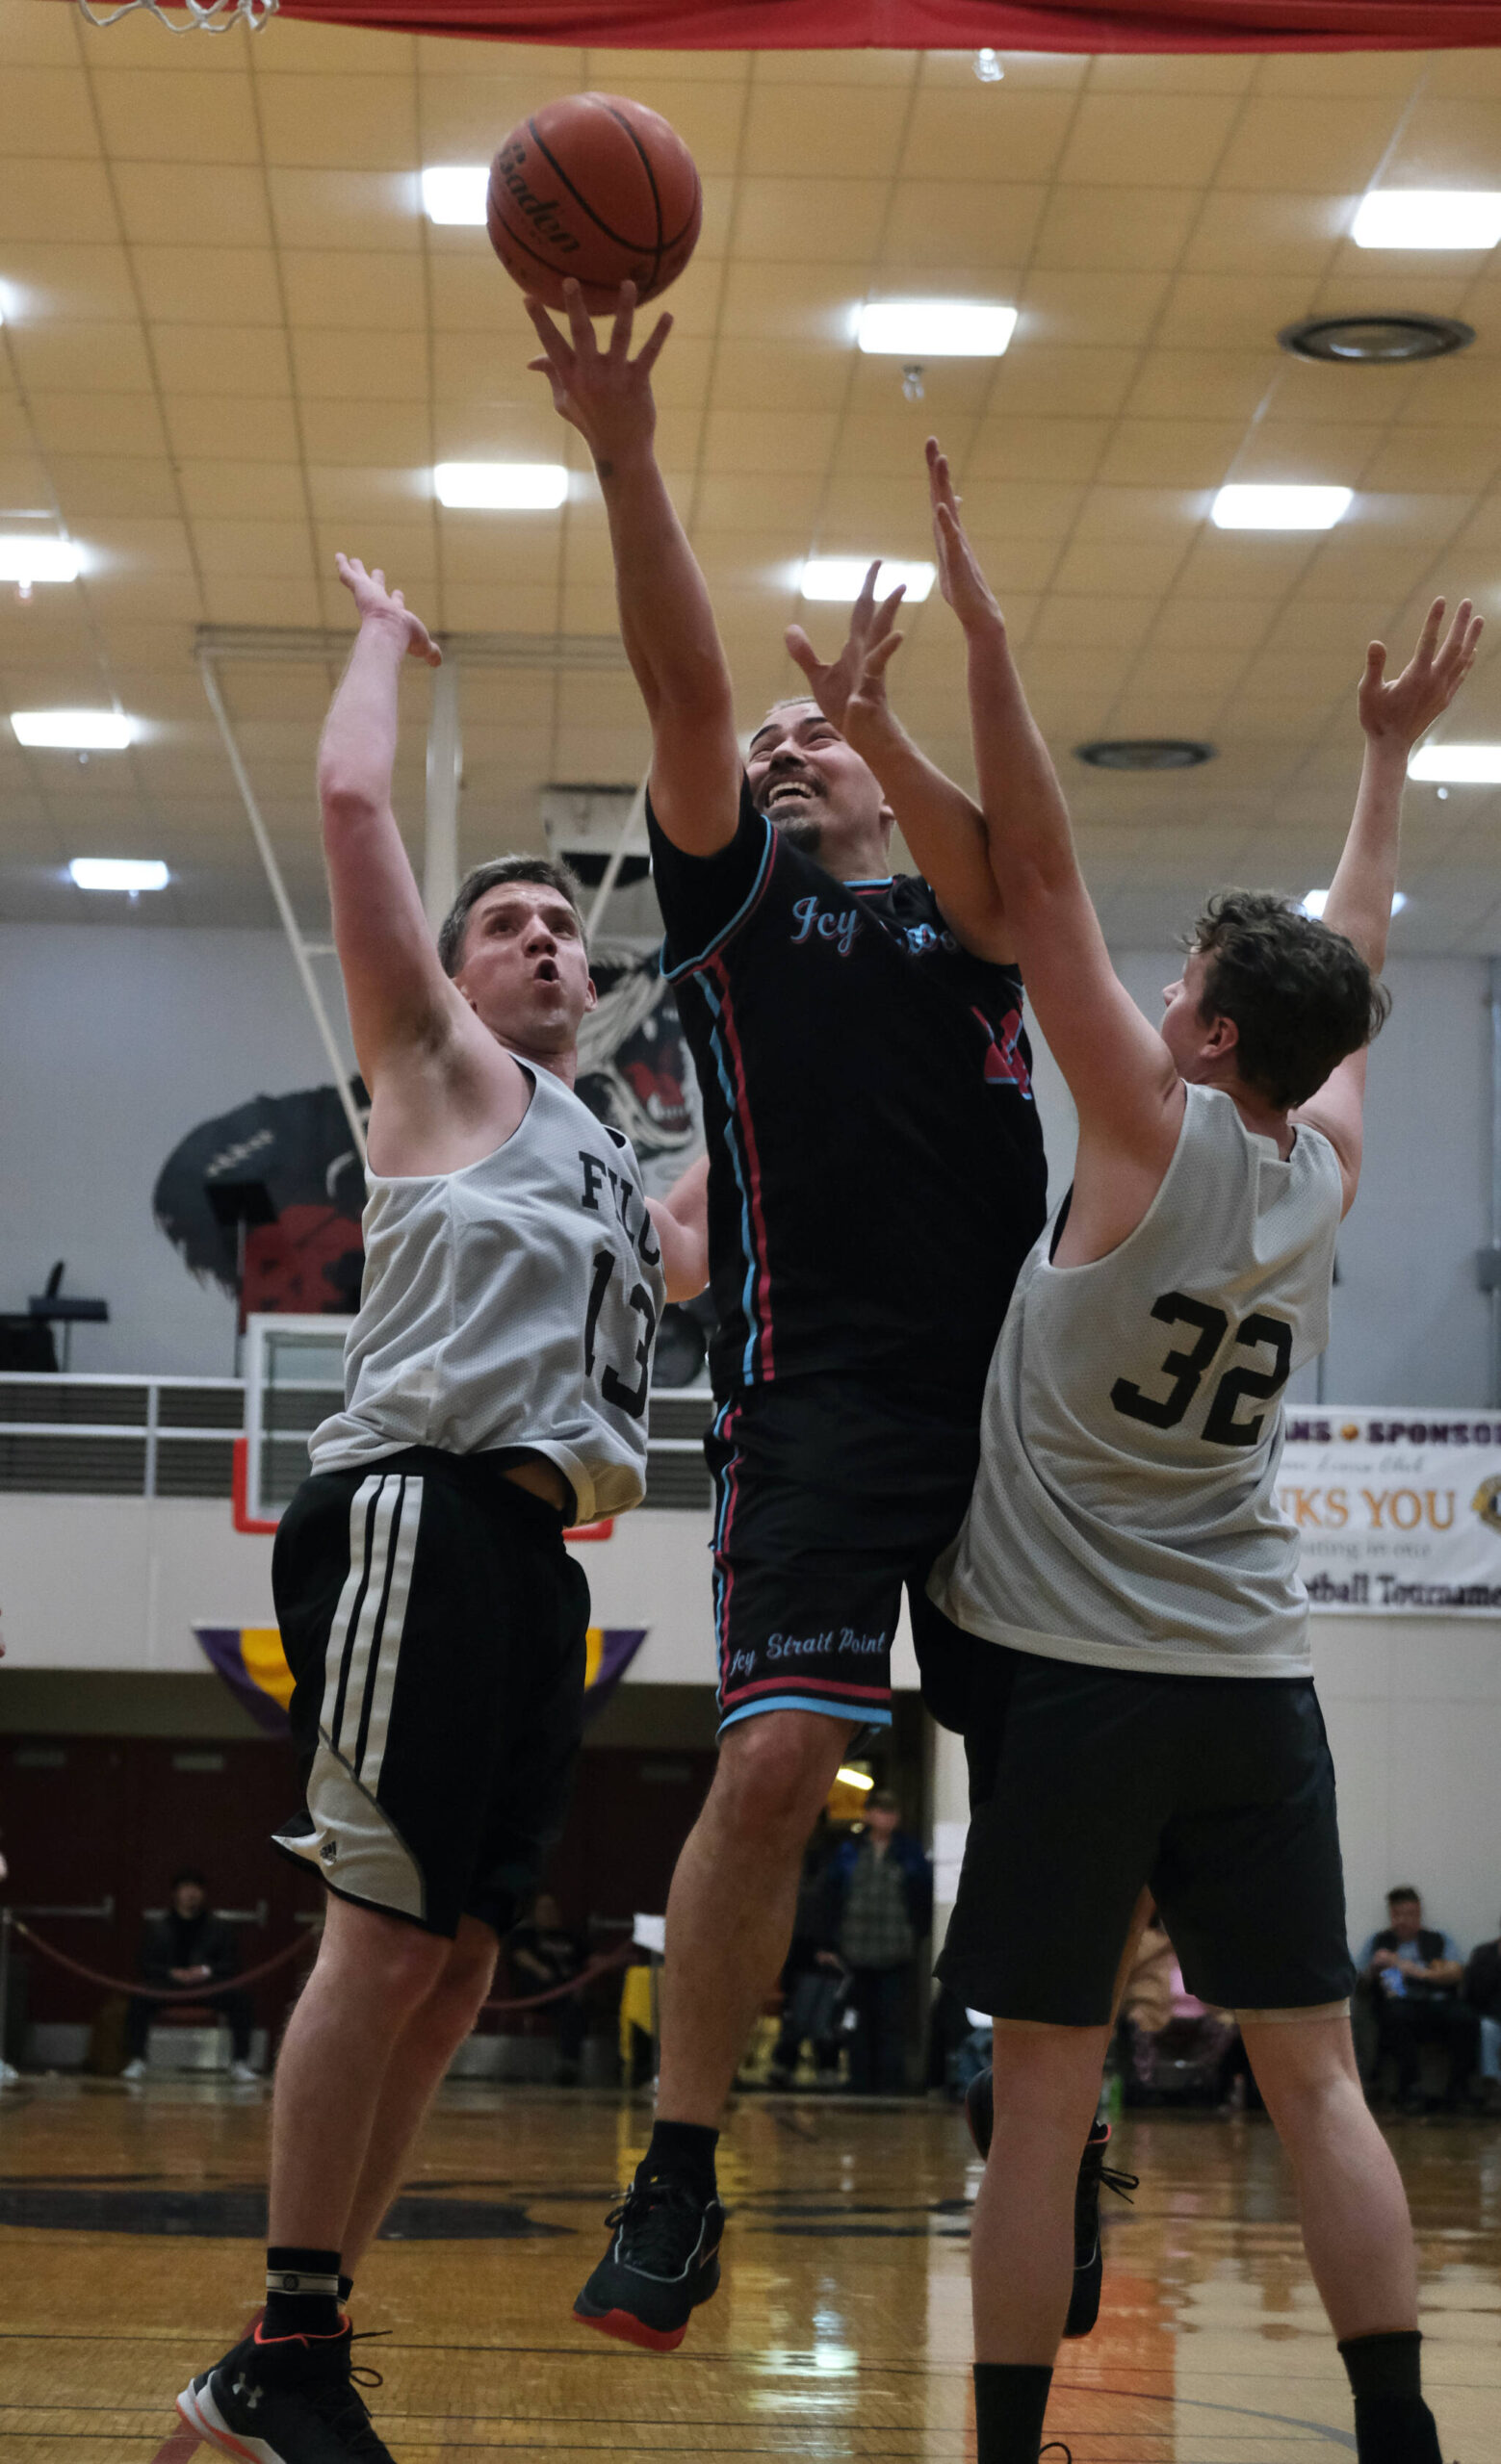 Hoonah’s Travis Dybdahl scores between Filcom’s Tom Gisler (13) and Charlie Herrington (32) during C Bracket action in the Gold Medal Basketball Tournament, Monday, March 20, at Juneau-Douglas High School: Yadaa.at Kalé. (Klas Stolpe / For the Juneau Empire)